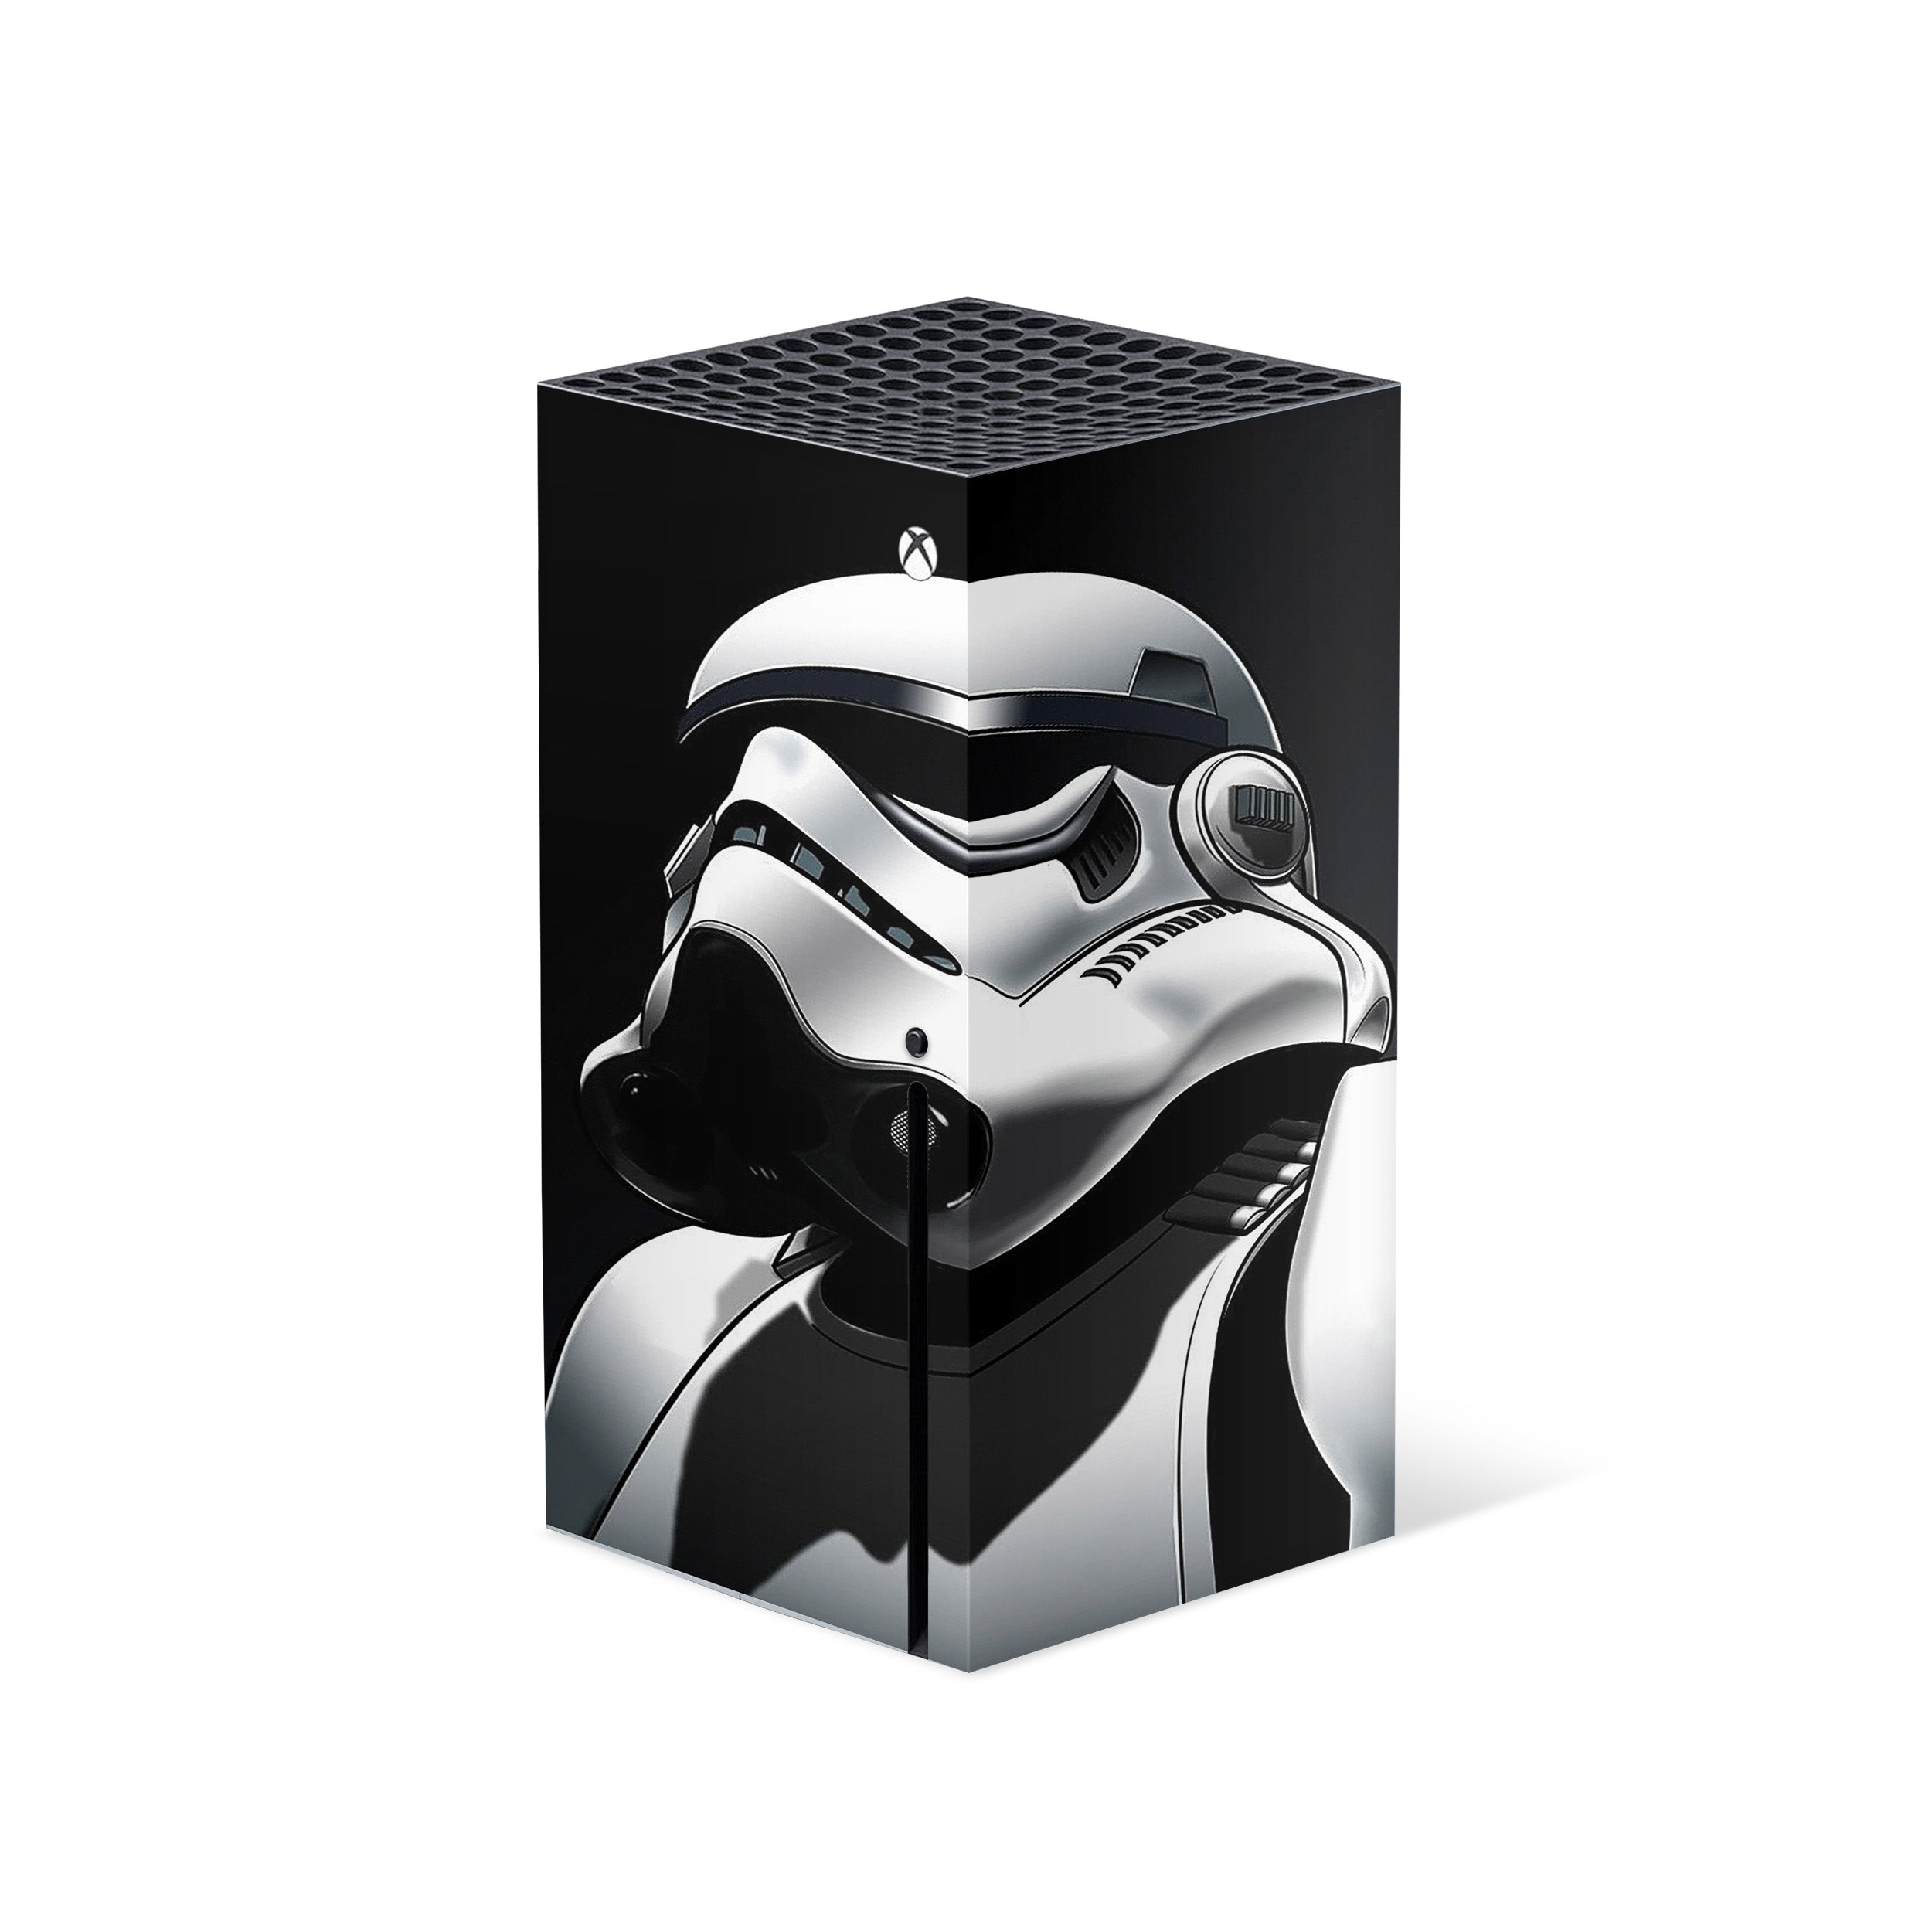 A video game skin featuring a Star Wars Storm Trooper Moonwalk design for the Xbox Series X.